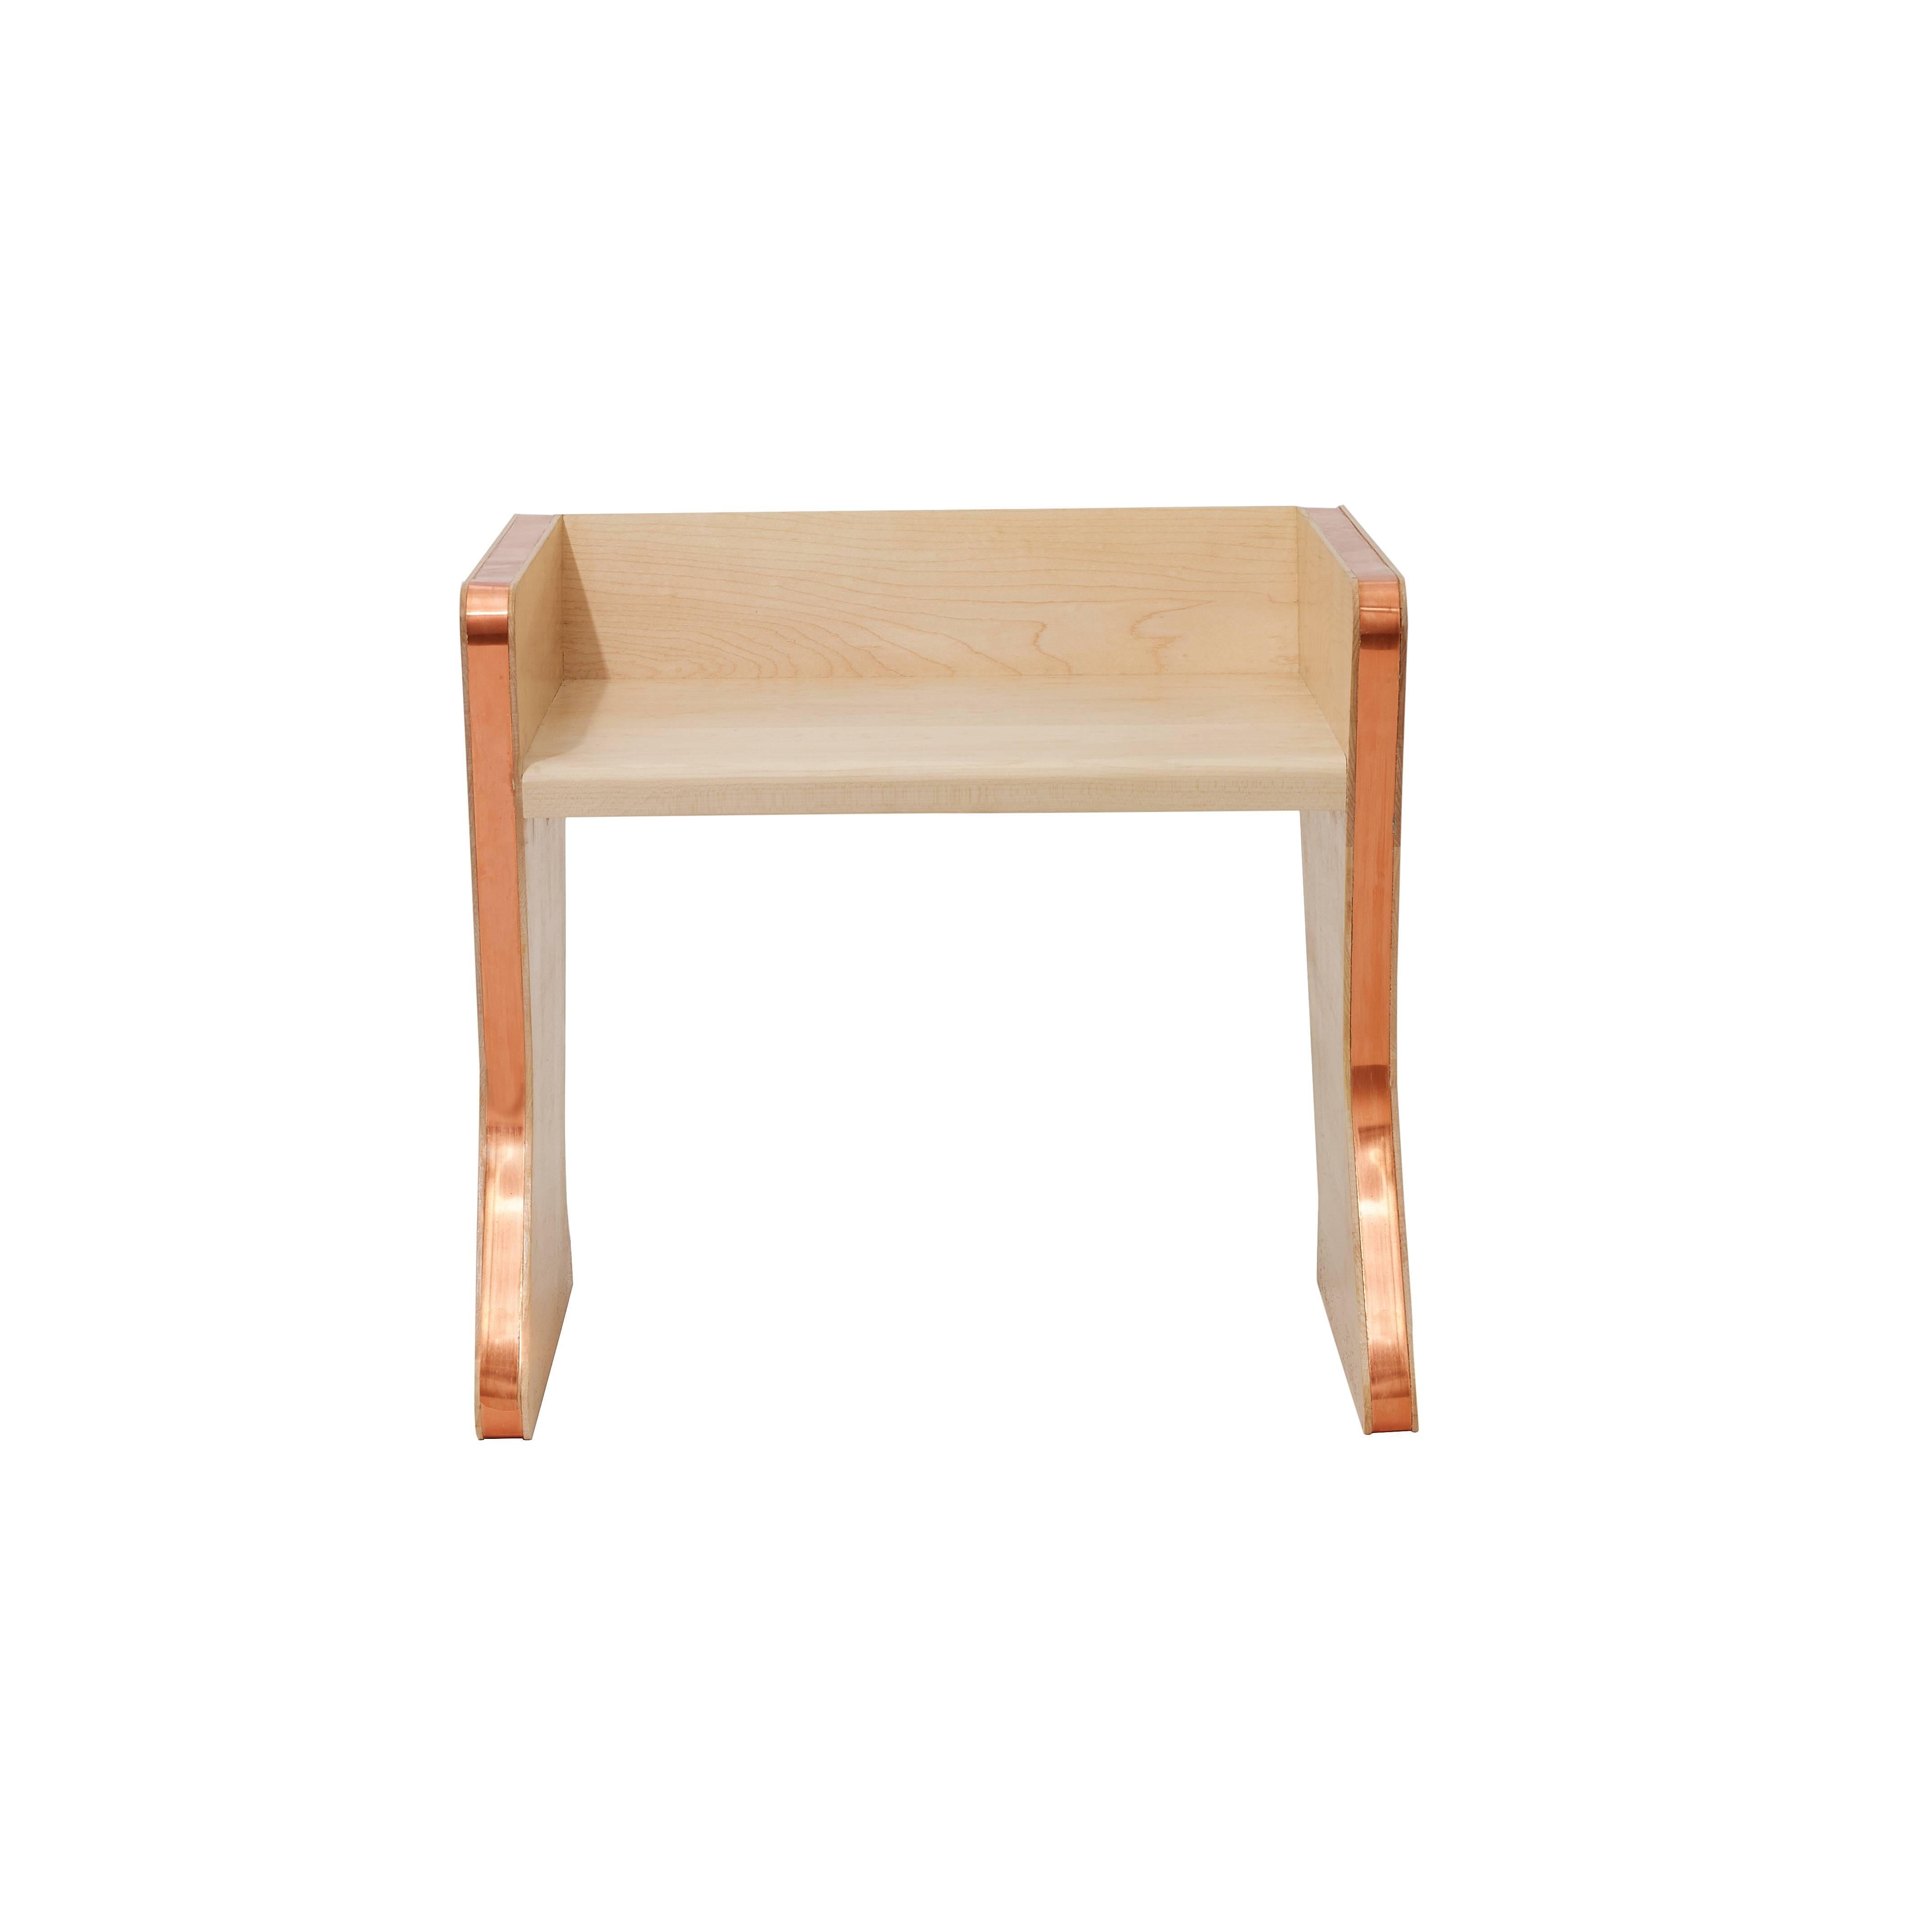 'Sit' Child Chair from the Heritage Collection by studiokinder in Maple/Copper

Studiokinder
Contemporary, USA, 2017
Maple with copper
Measures: H 15